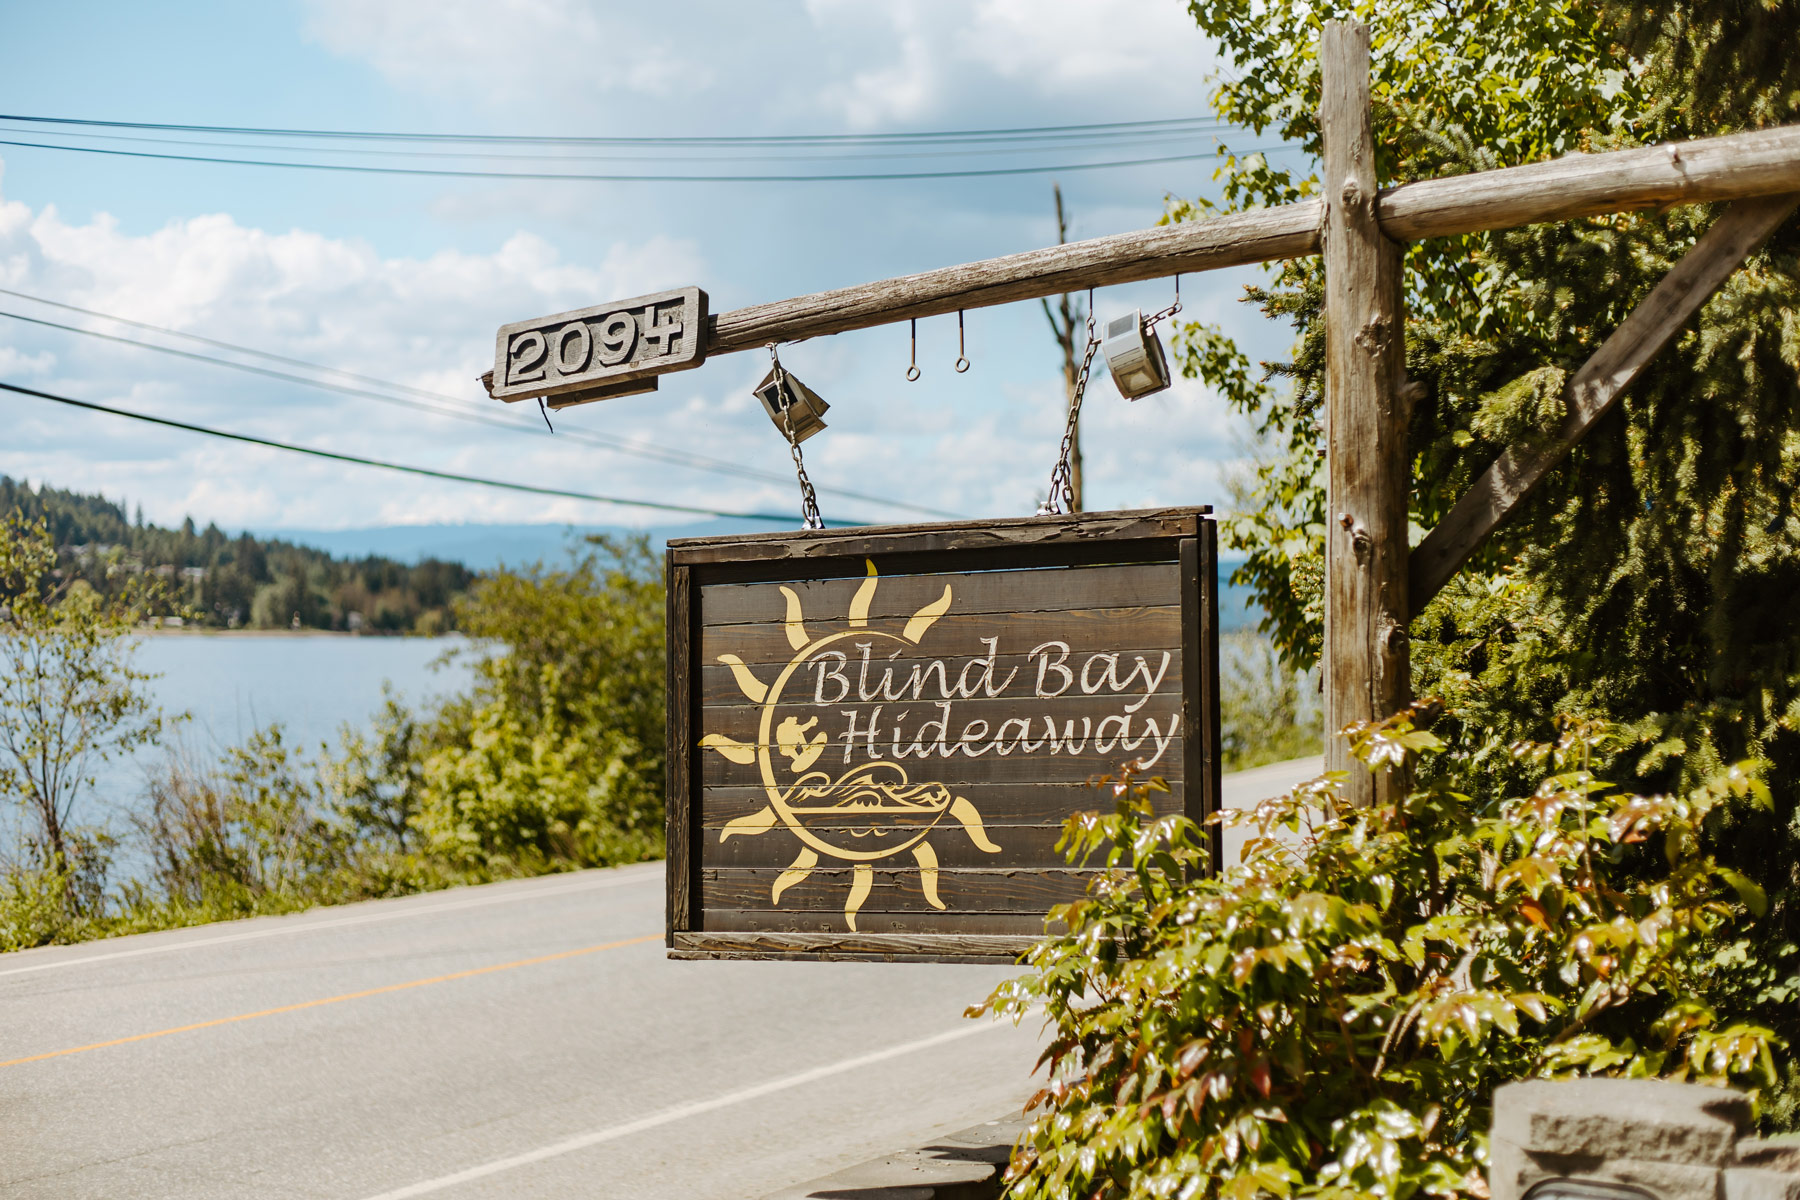 Blind Bay Hideaway: Beautiful accommodations on Shuswap Lake for a relaxing getaway in Blind Bay.